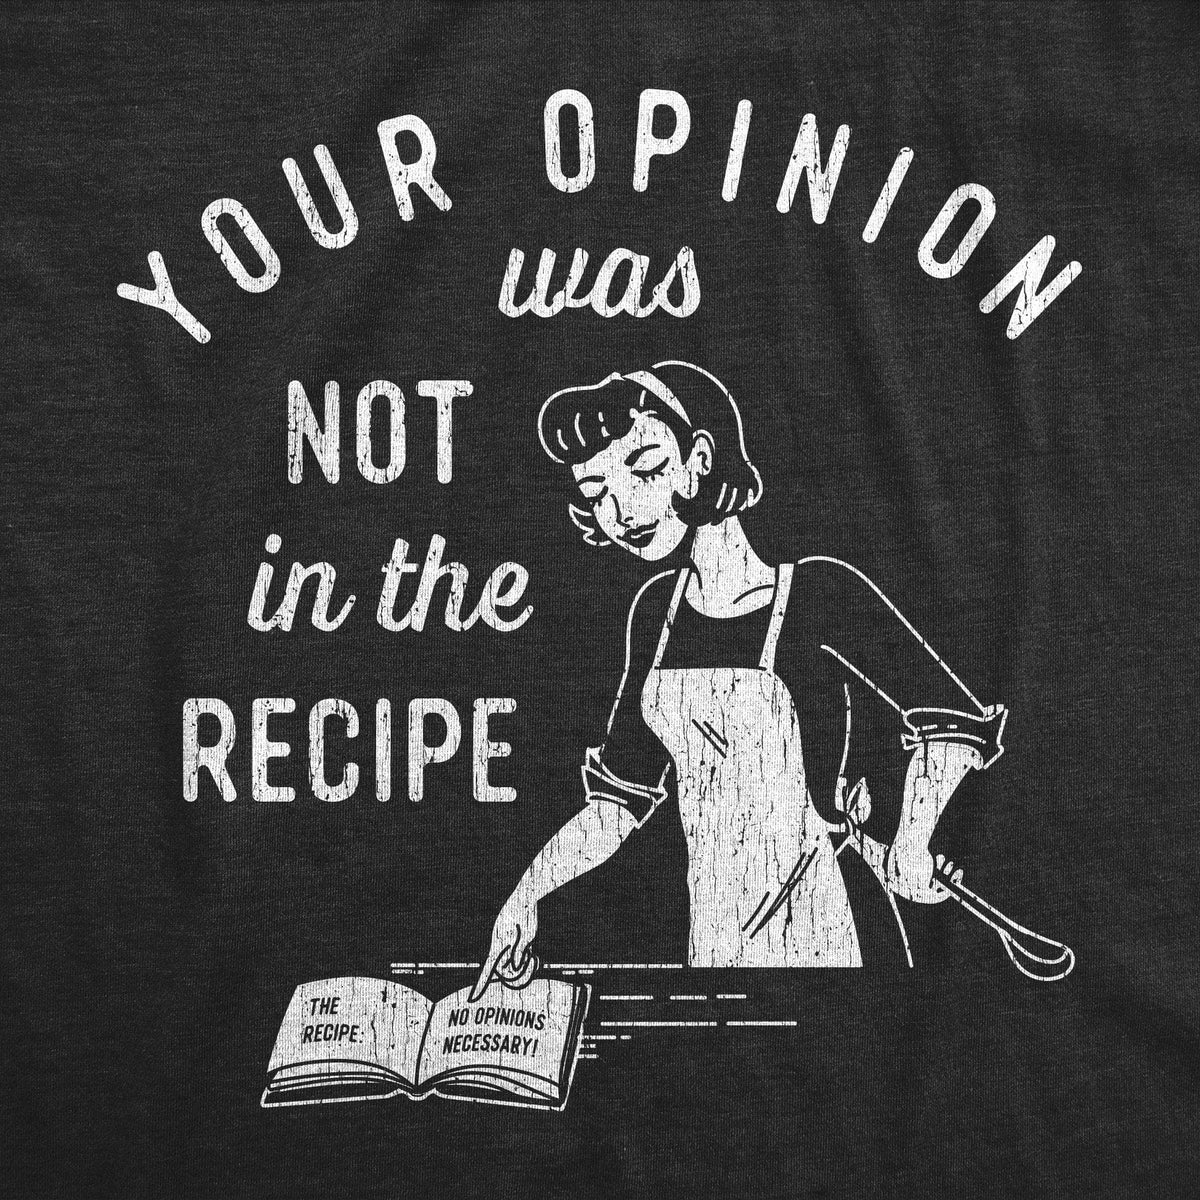 Your Opinion Was Not In The Recipe Women&#39;s Tshirt - Crazy Dog T-Shirts